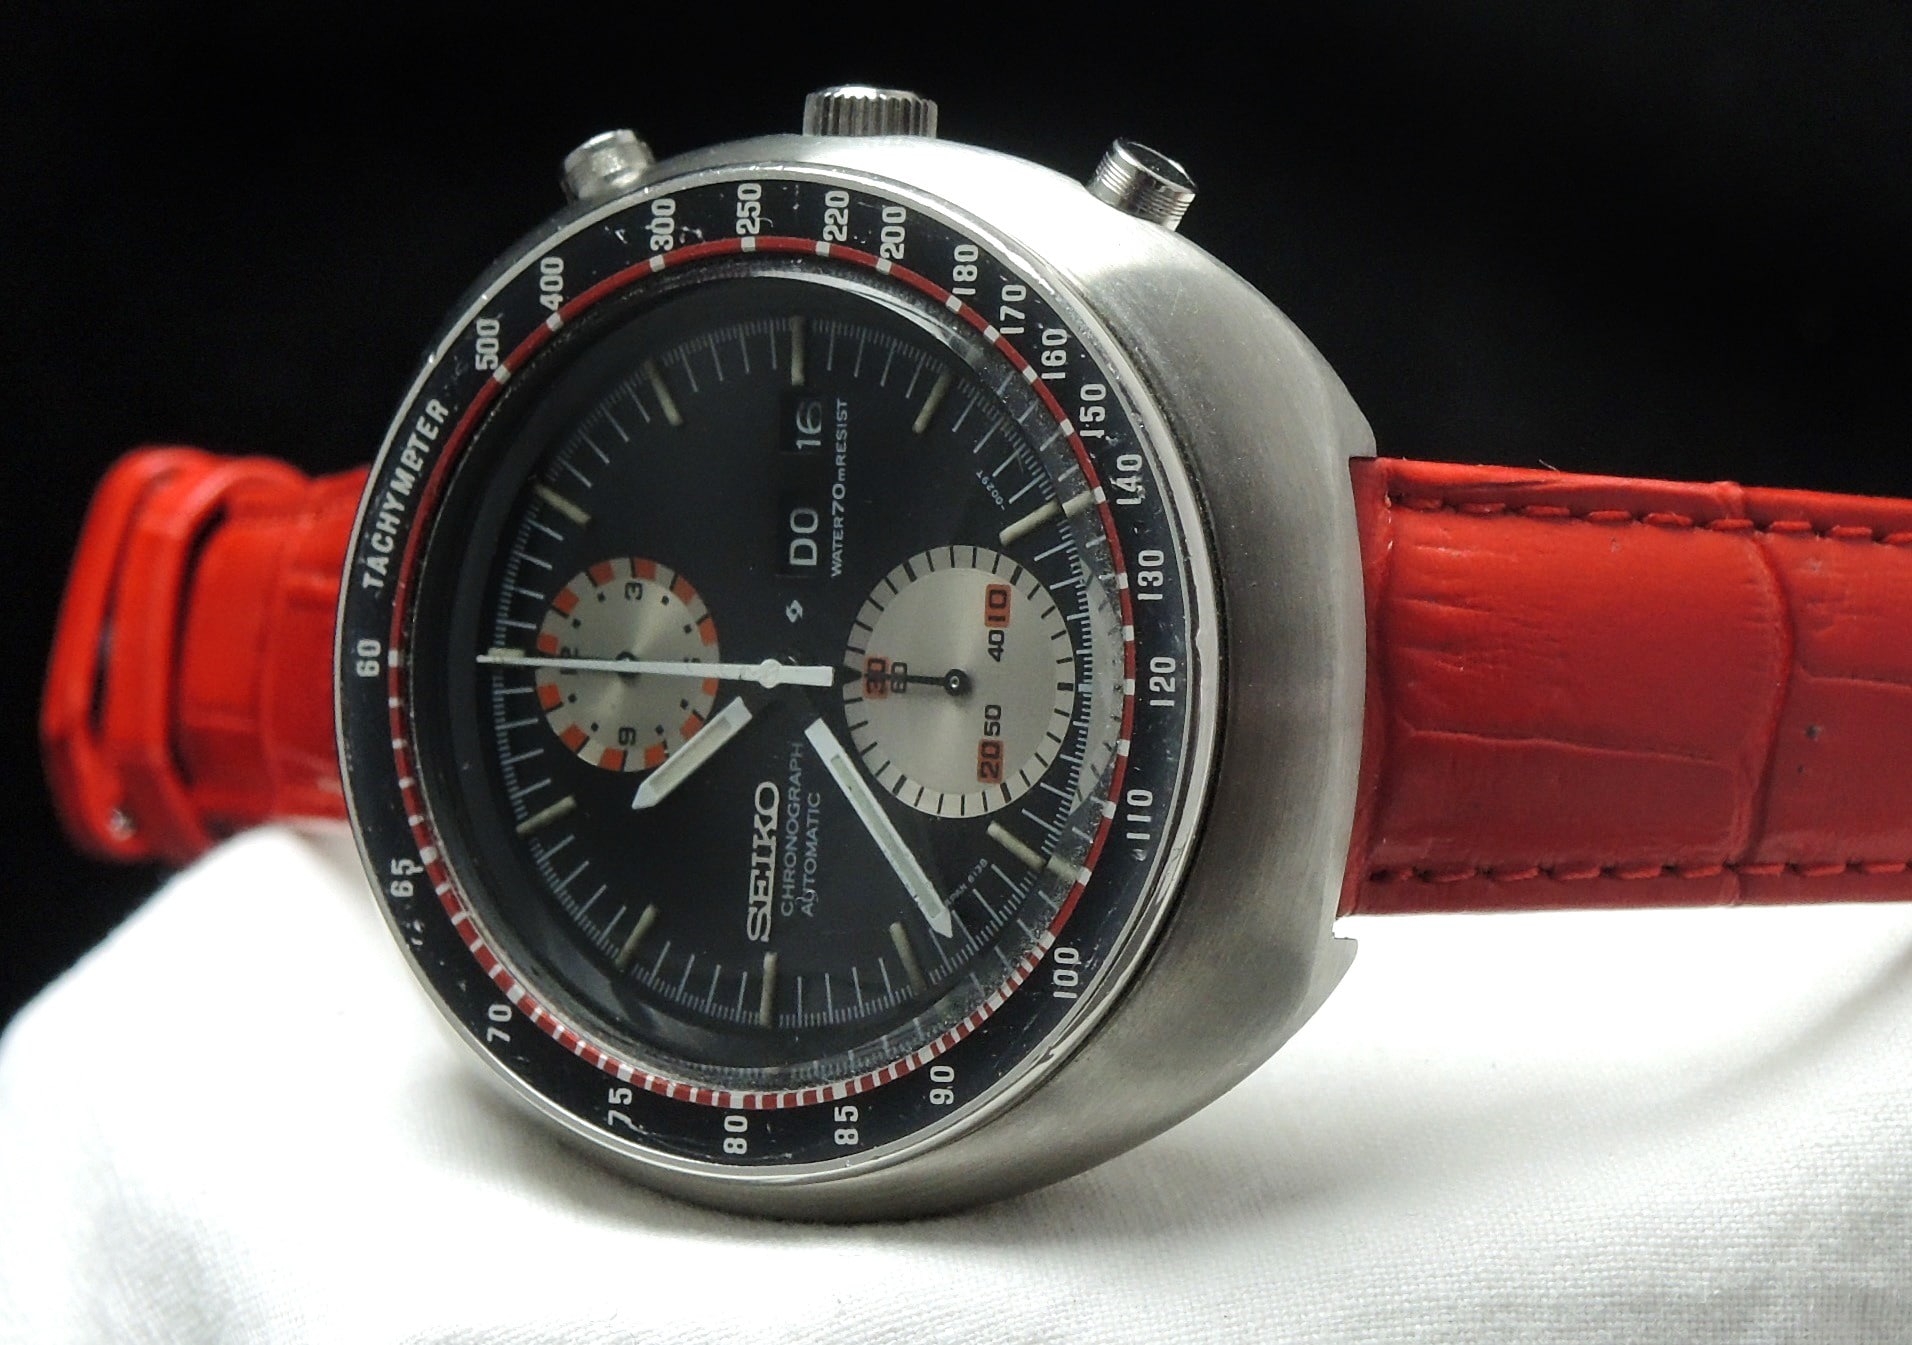 Great Seiko UFO Day Date Chronograph in Racing Style Vintage | Vintage ...